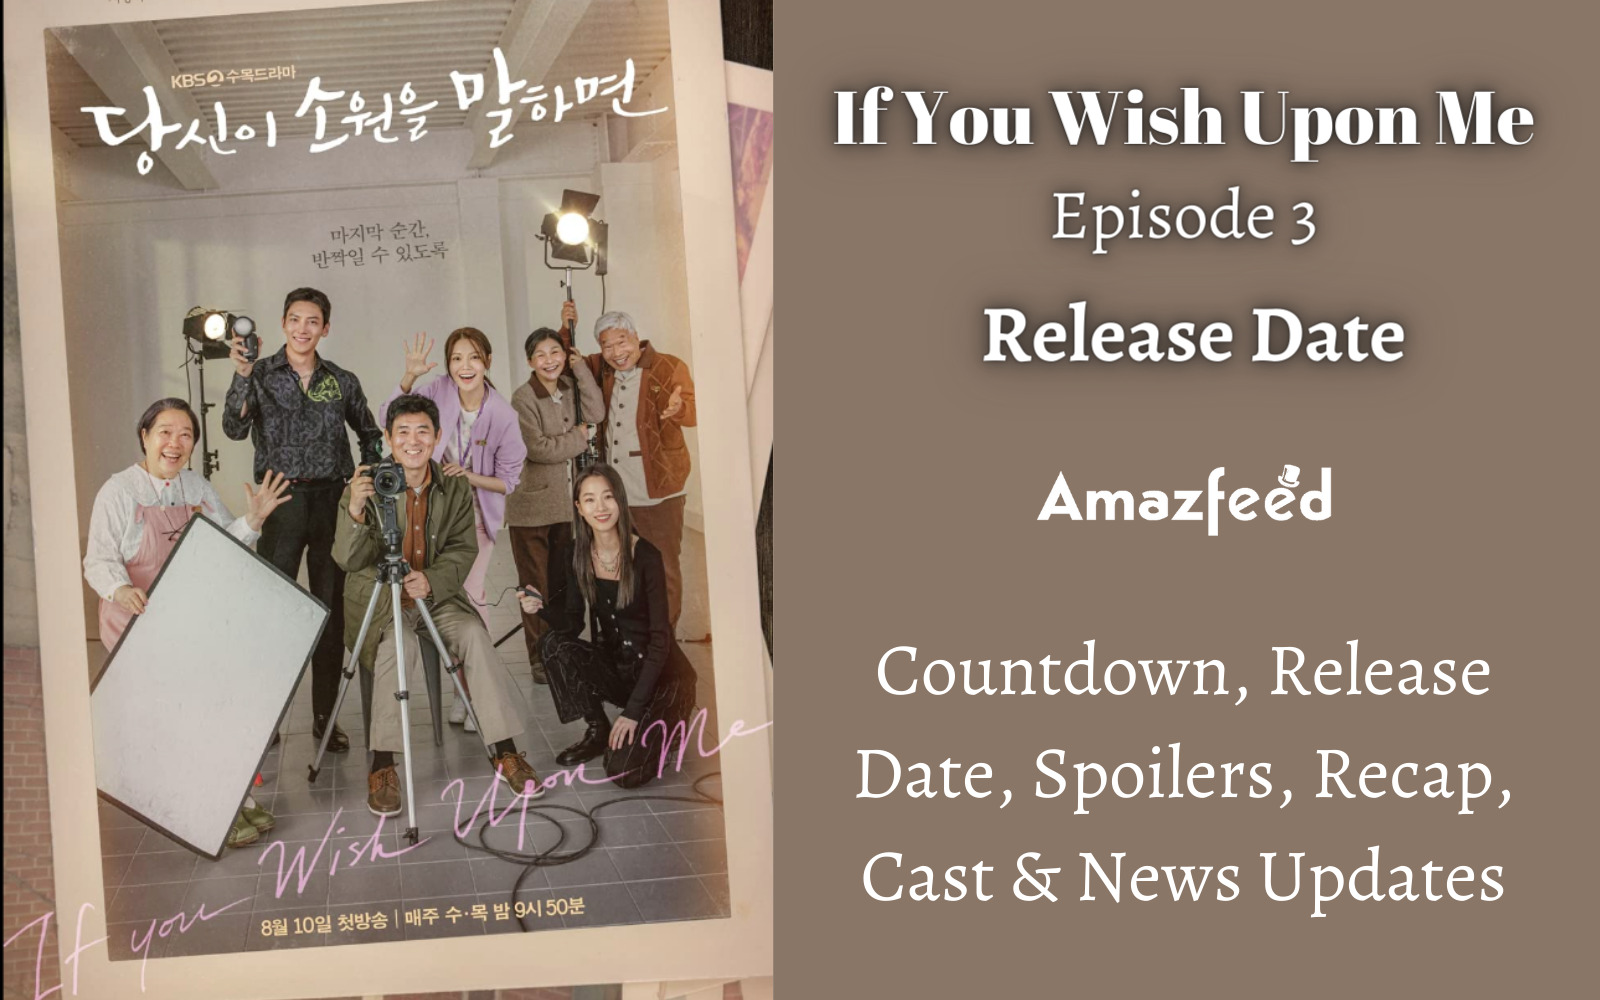 If You Wish Upon Me Season 1 Episode 3 Release Date